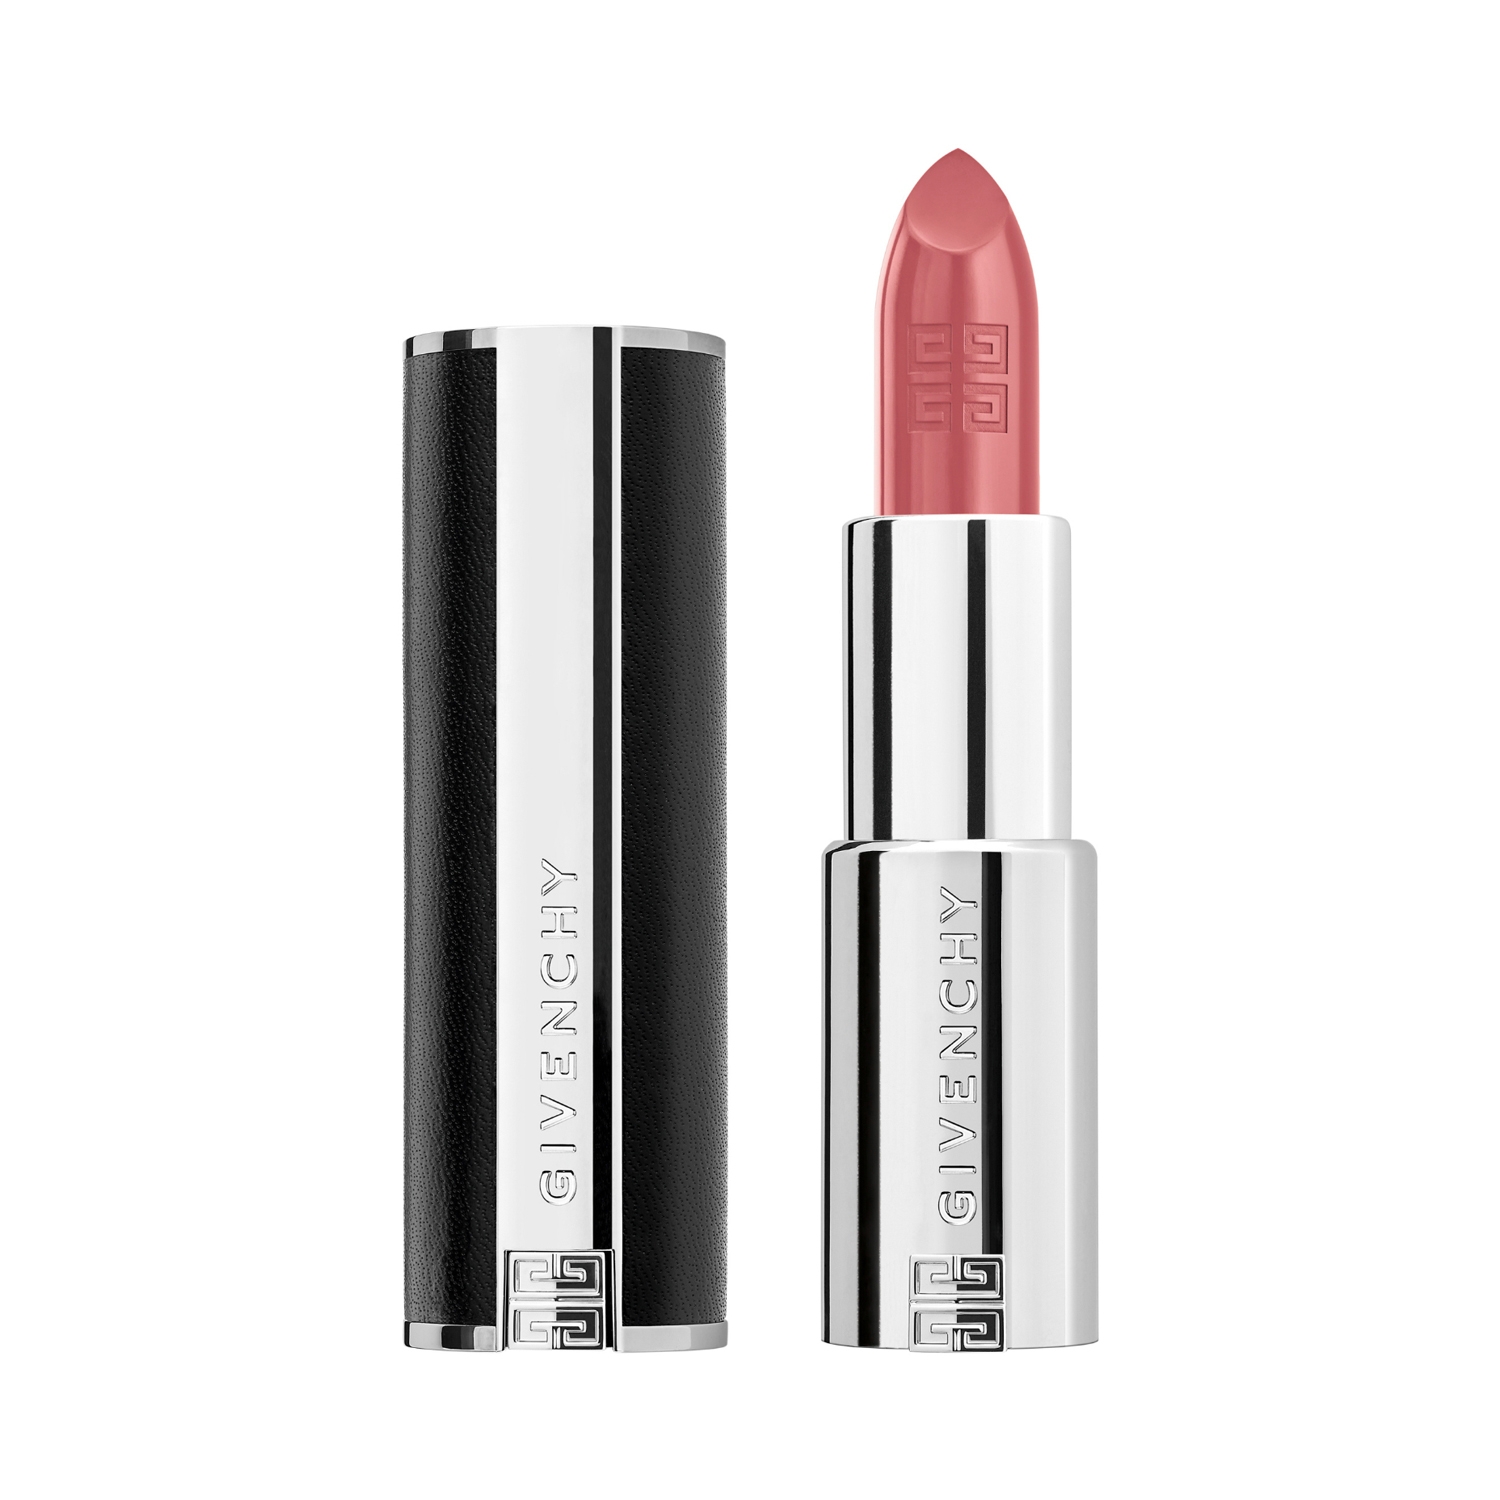 Givenchy | Givenchy Le Rouge Interdit Intense Silk Lipstick - N 110 Beige Nu​ (3.4g)